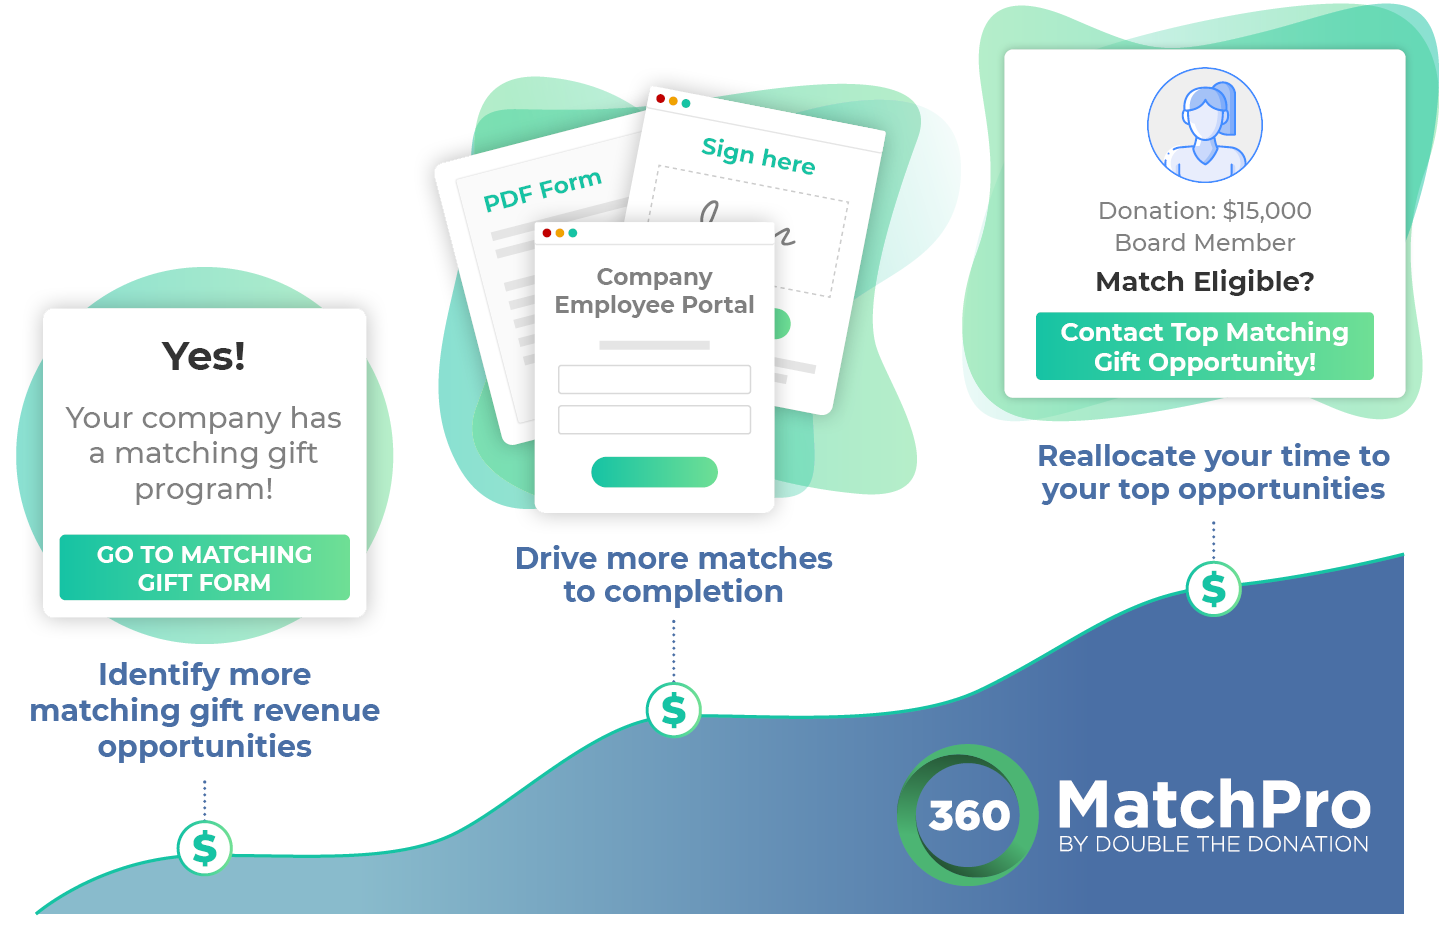 This image lists the features of 360MatchPro alongside an increasing graph to represent growing revenue.